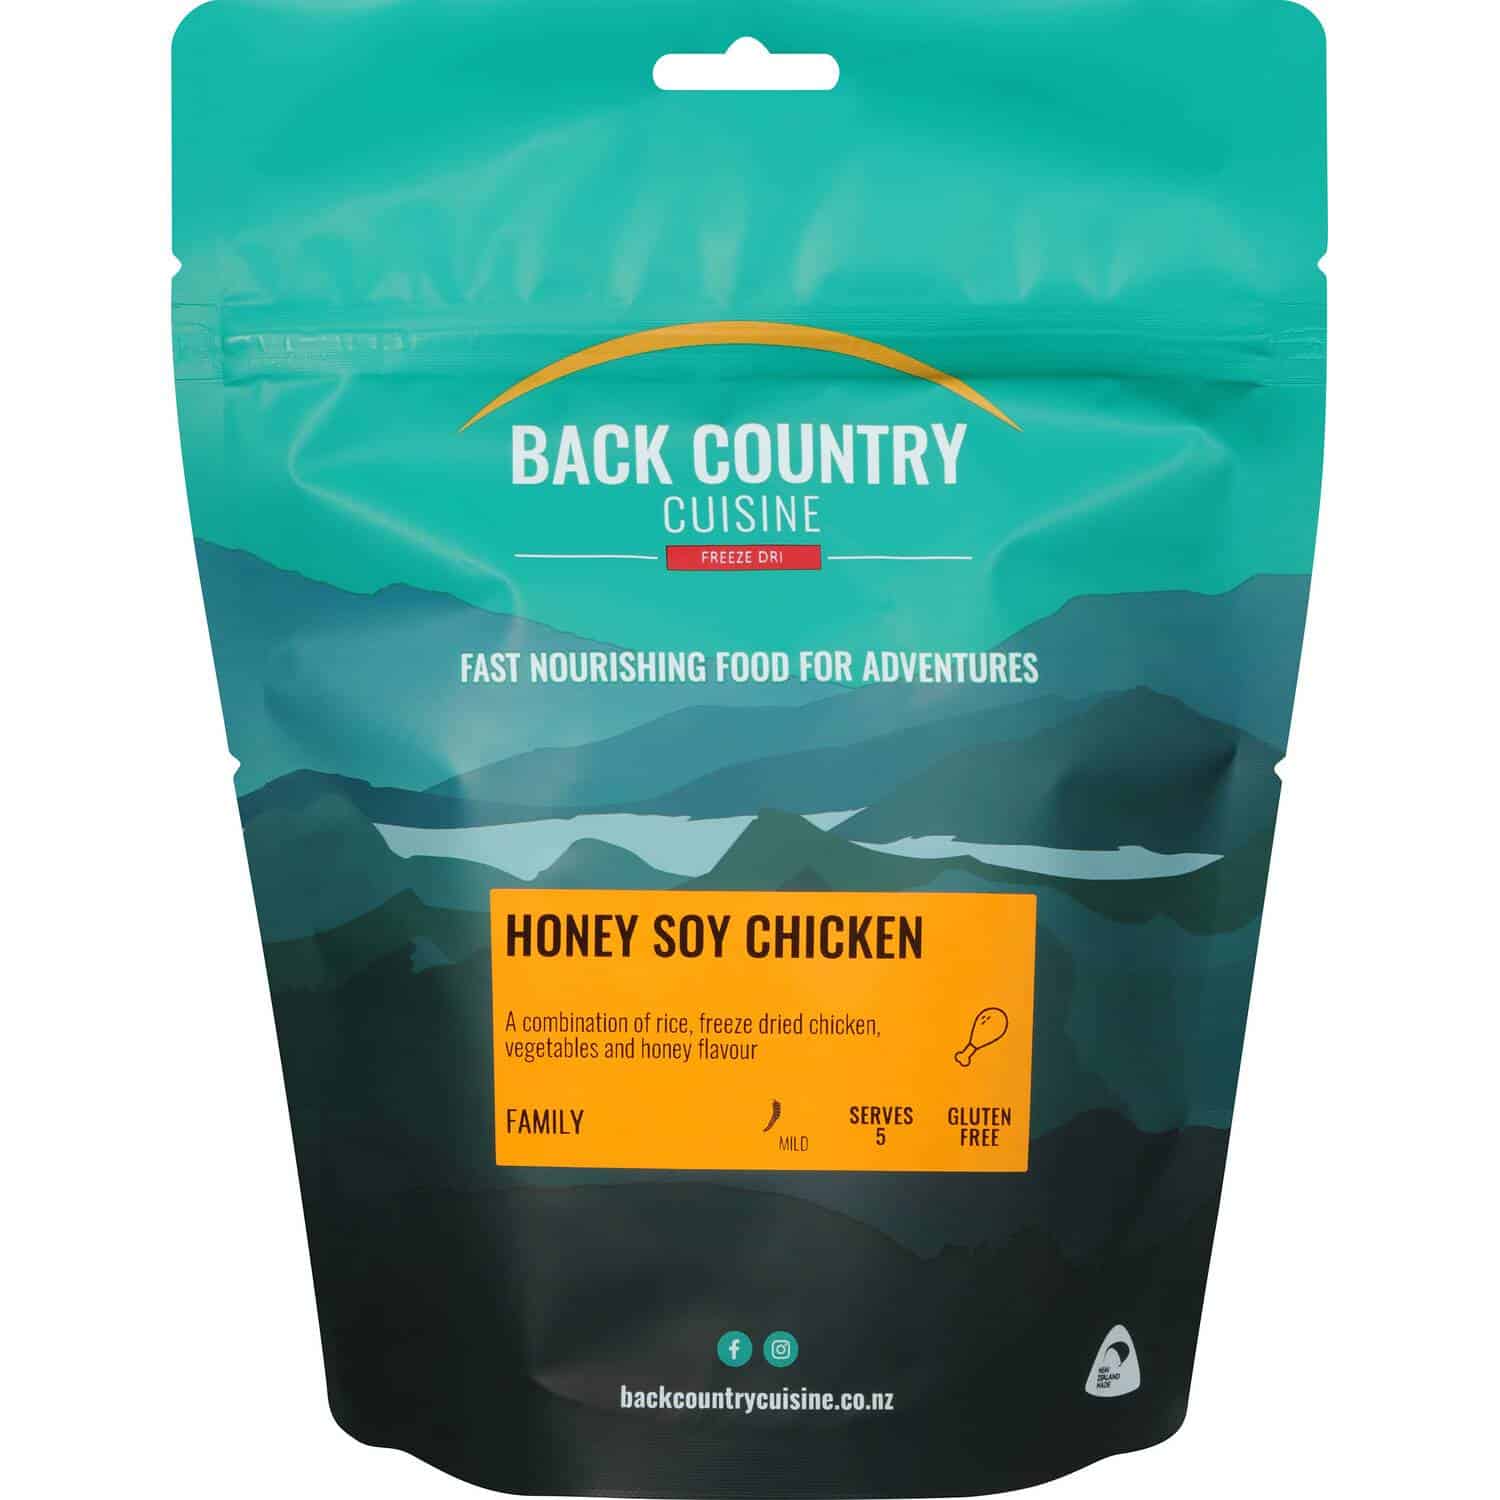 Back Country Cuisine Honey Soy Chicken Family - Tramping Food and Accessories sold by Venture Outdoors NZ